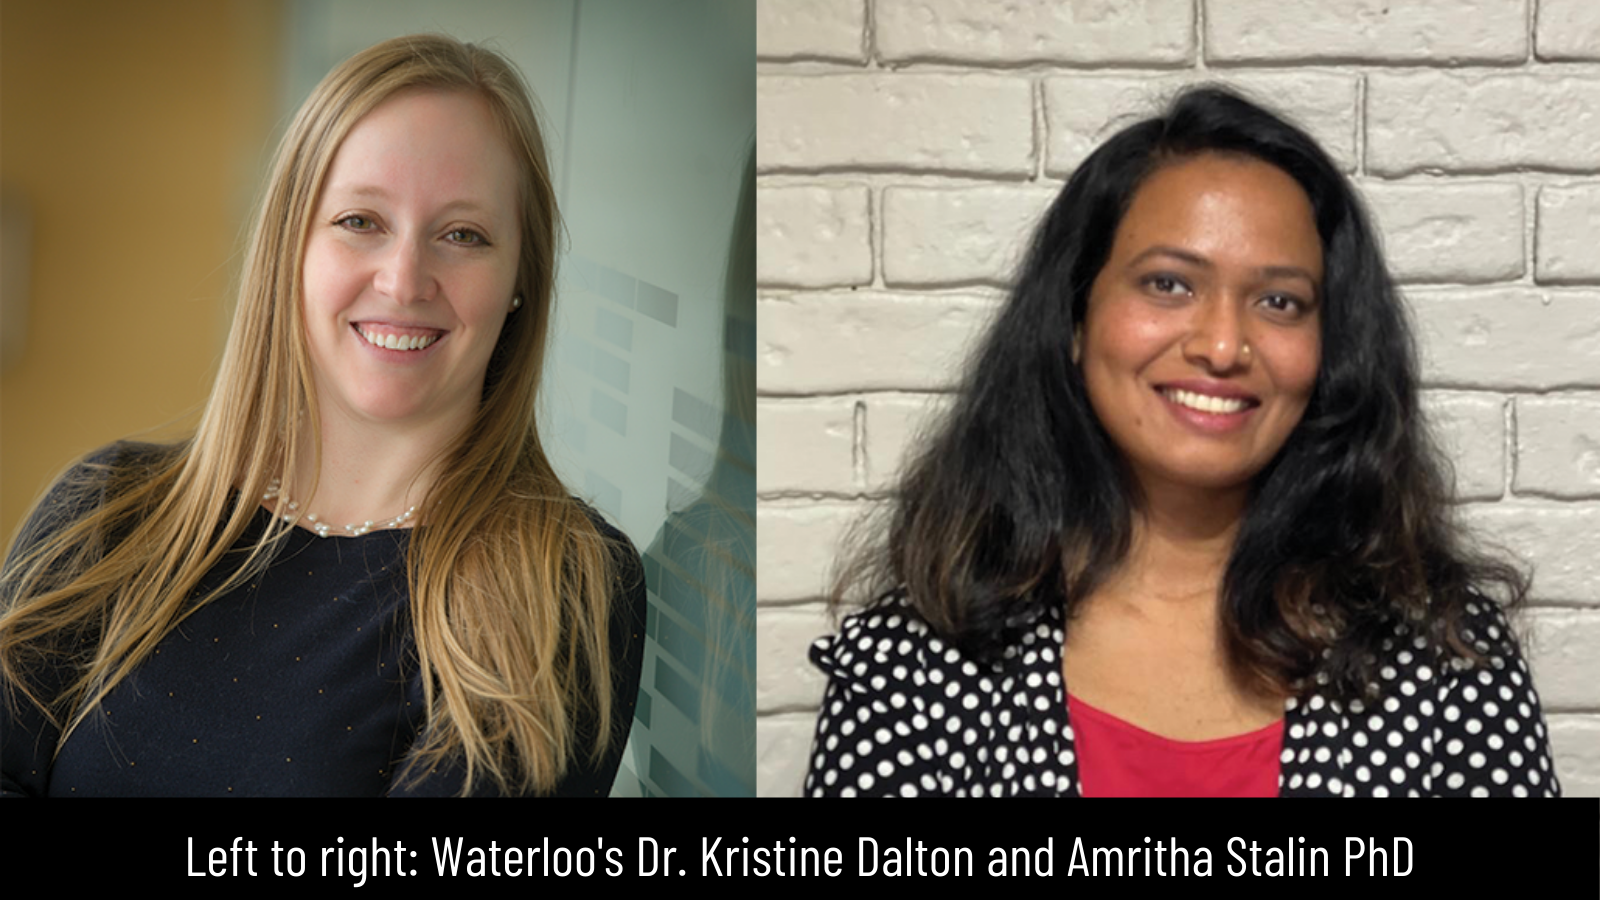 Left from right: Waterloo researchers Dr. Kristine Dalton and Amritha Stalin